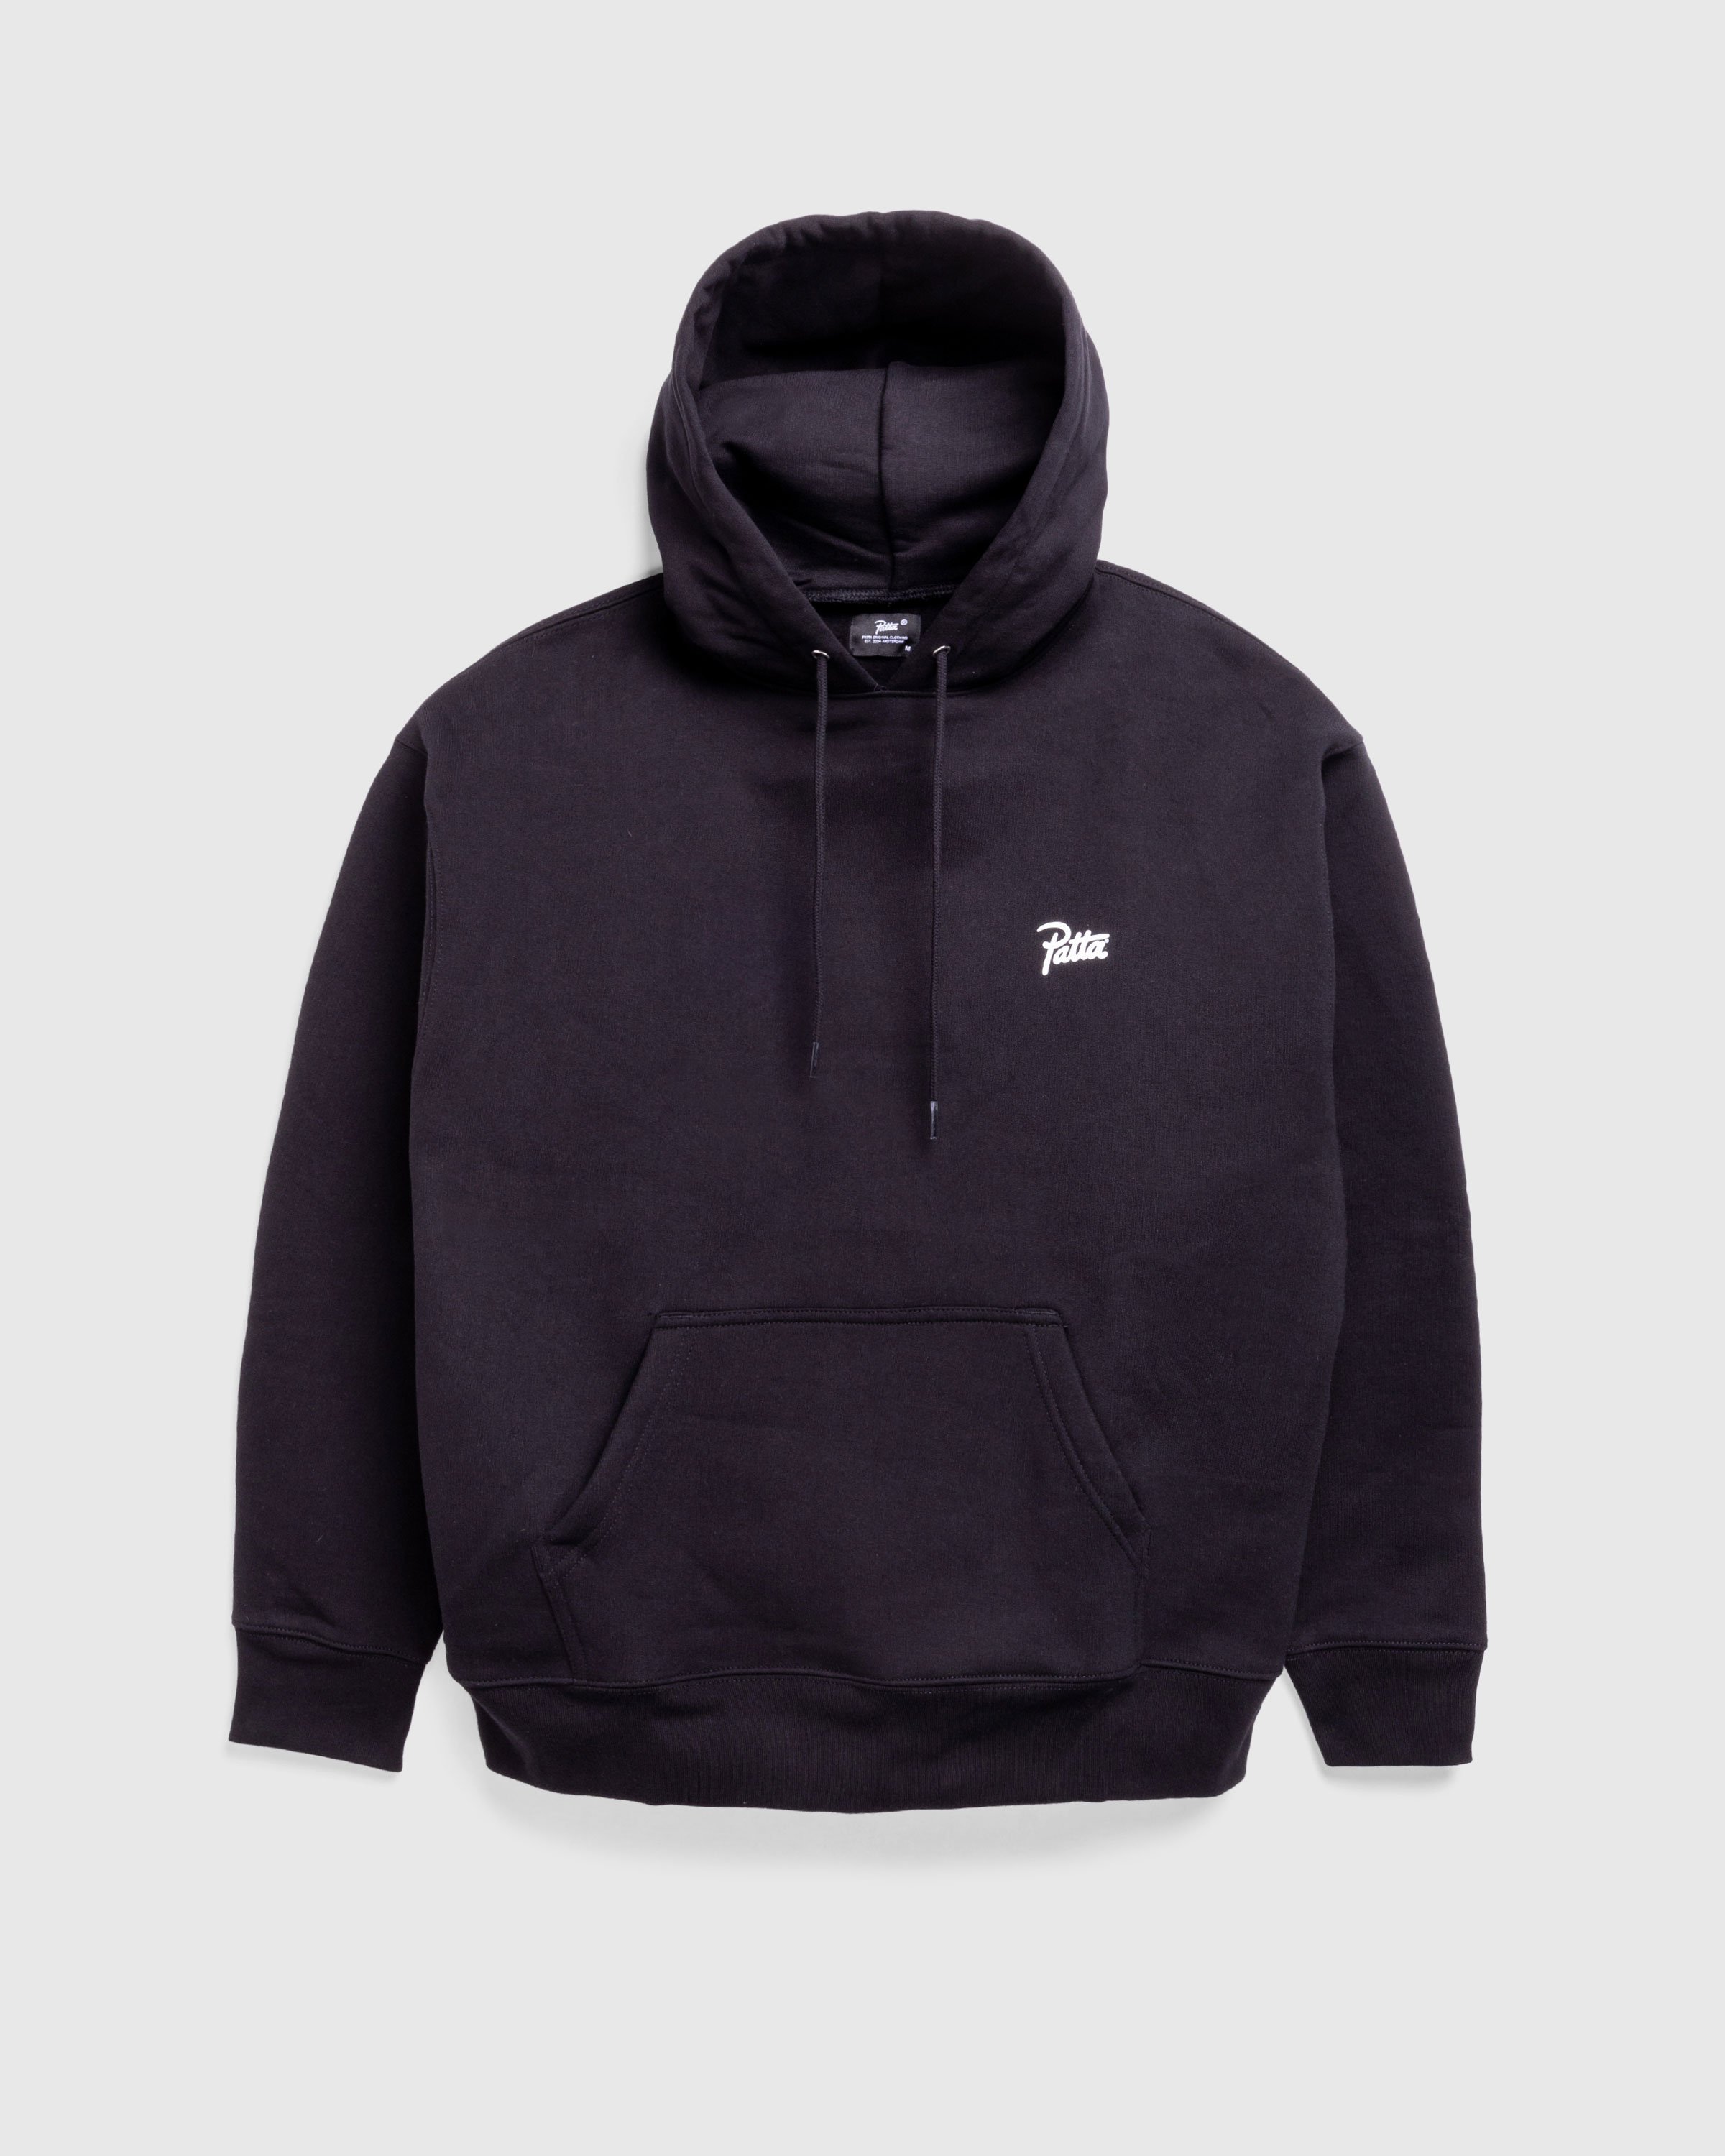 Patta - Some Like It Hot Classic Hooded Sweater Black - Clothing - Black - Image 1